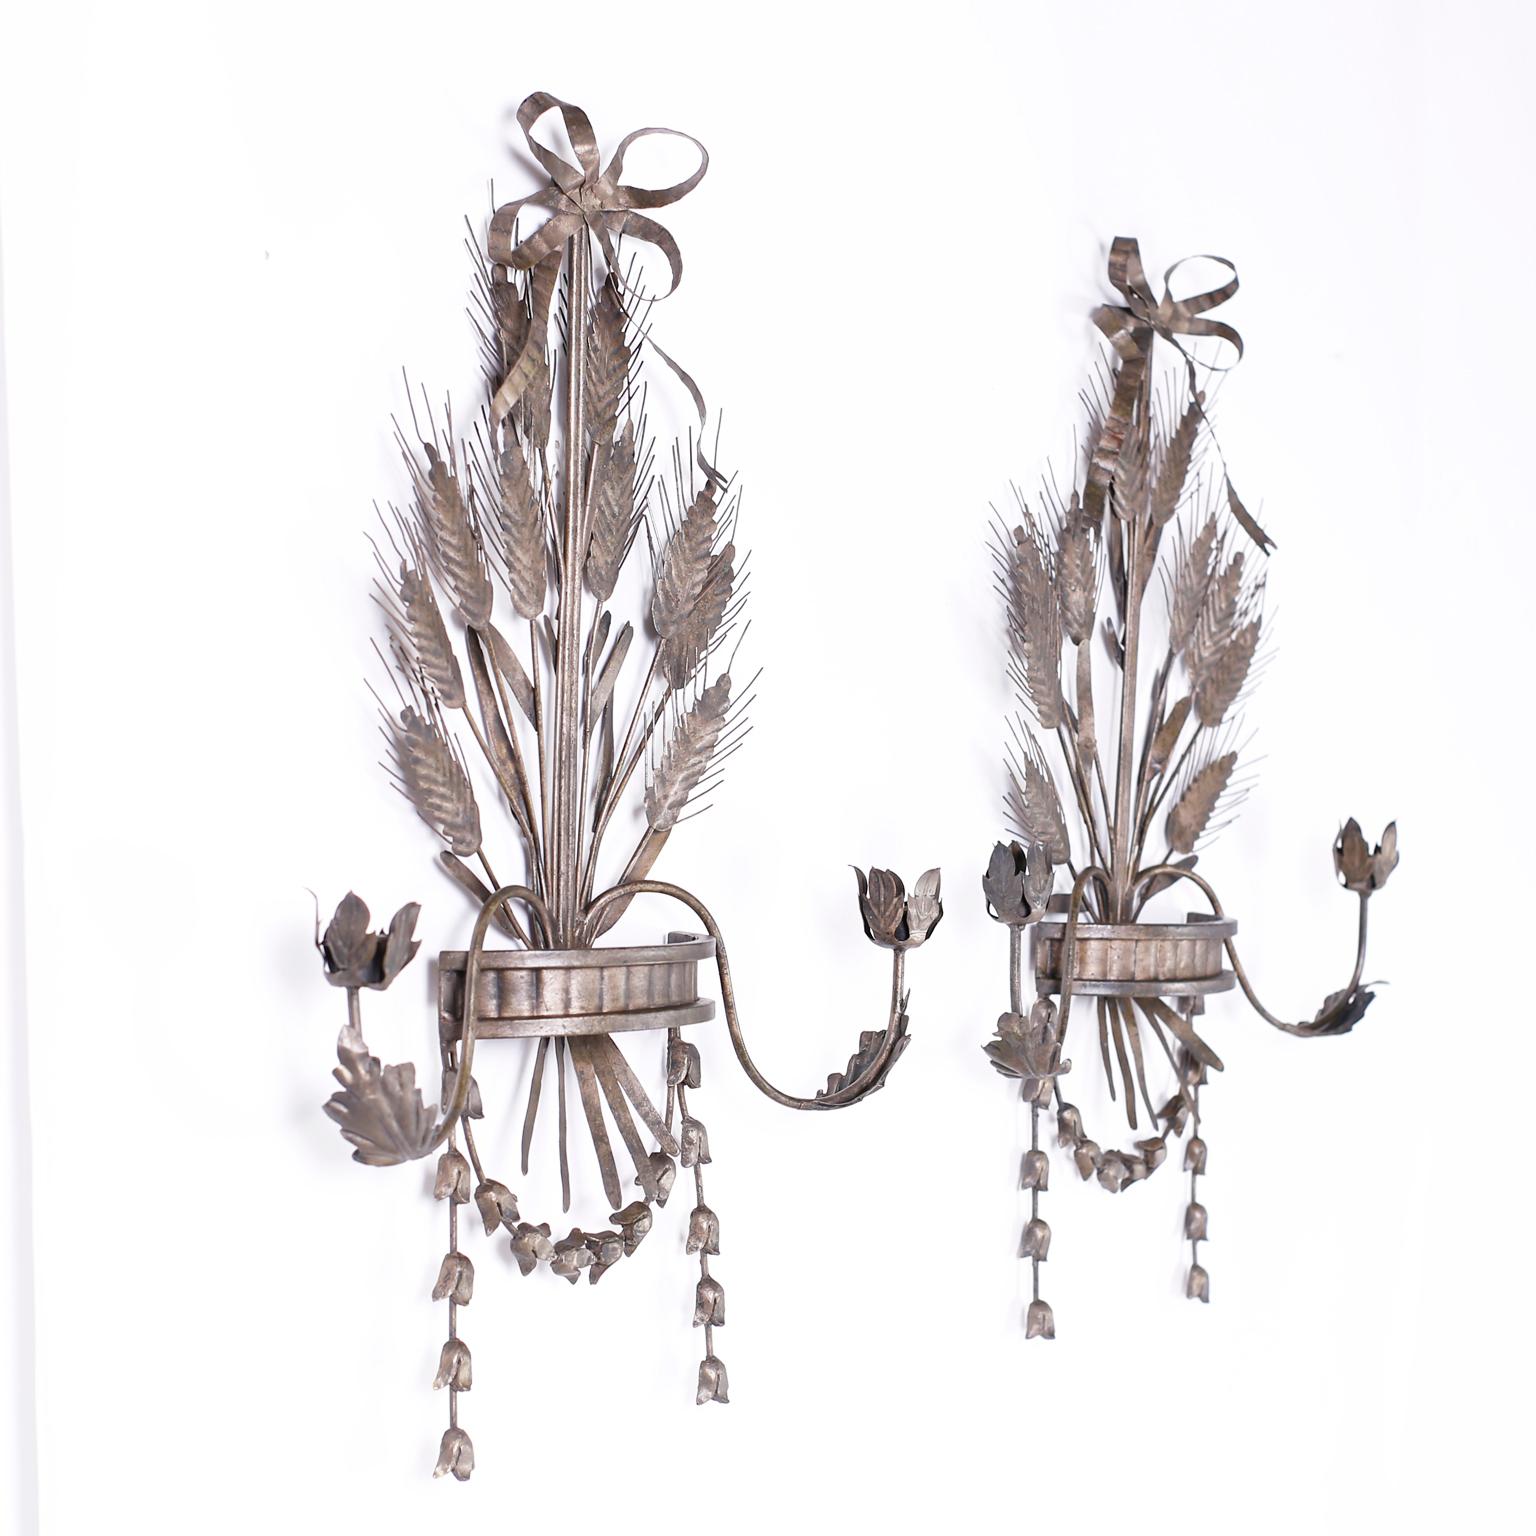 Unusual pair of metal two light wall sconces featuring ribbons, cattails, acanthus leaves and a sting of flowers, all with an old world worn gold washed finish.